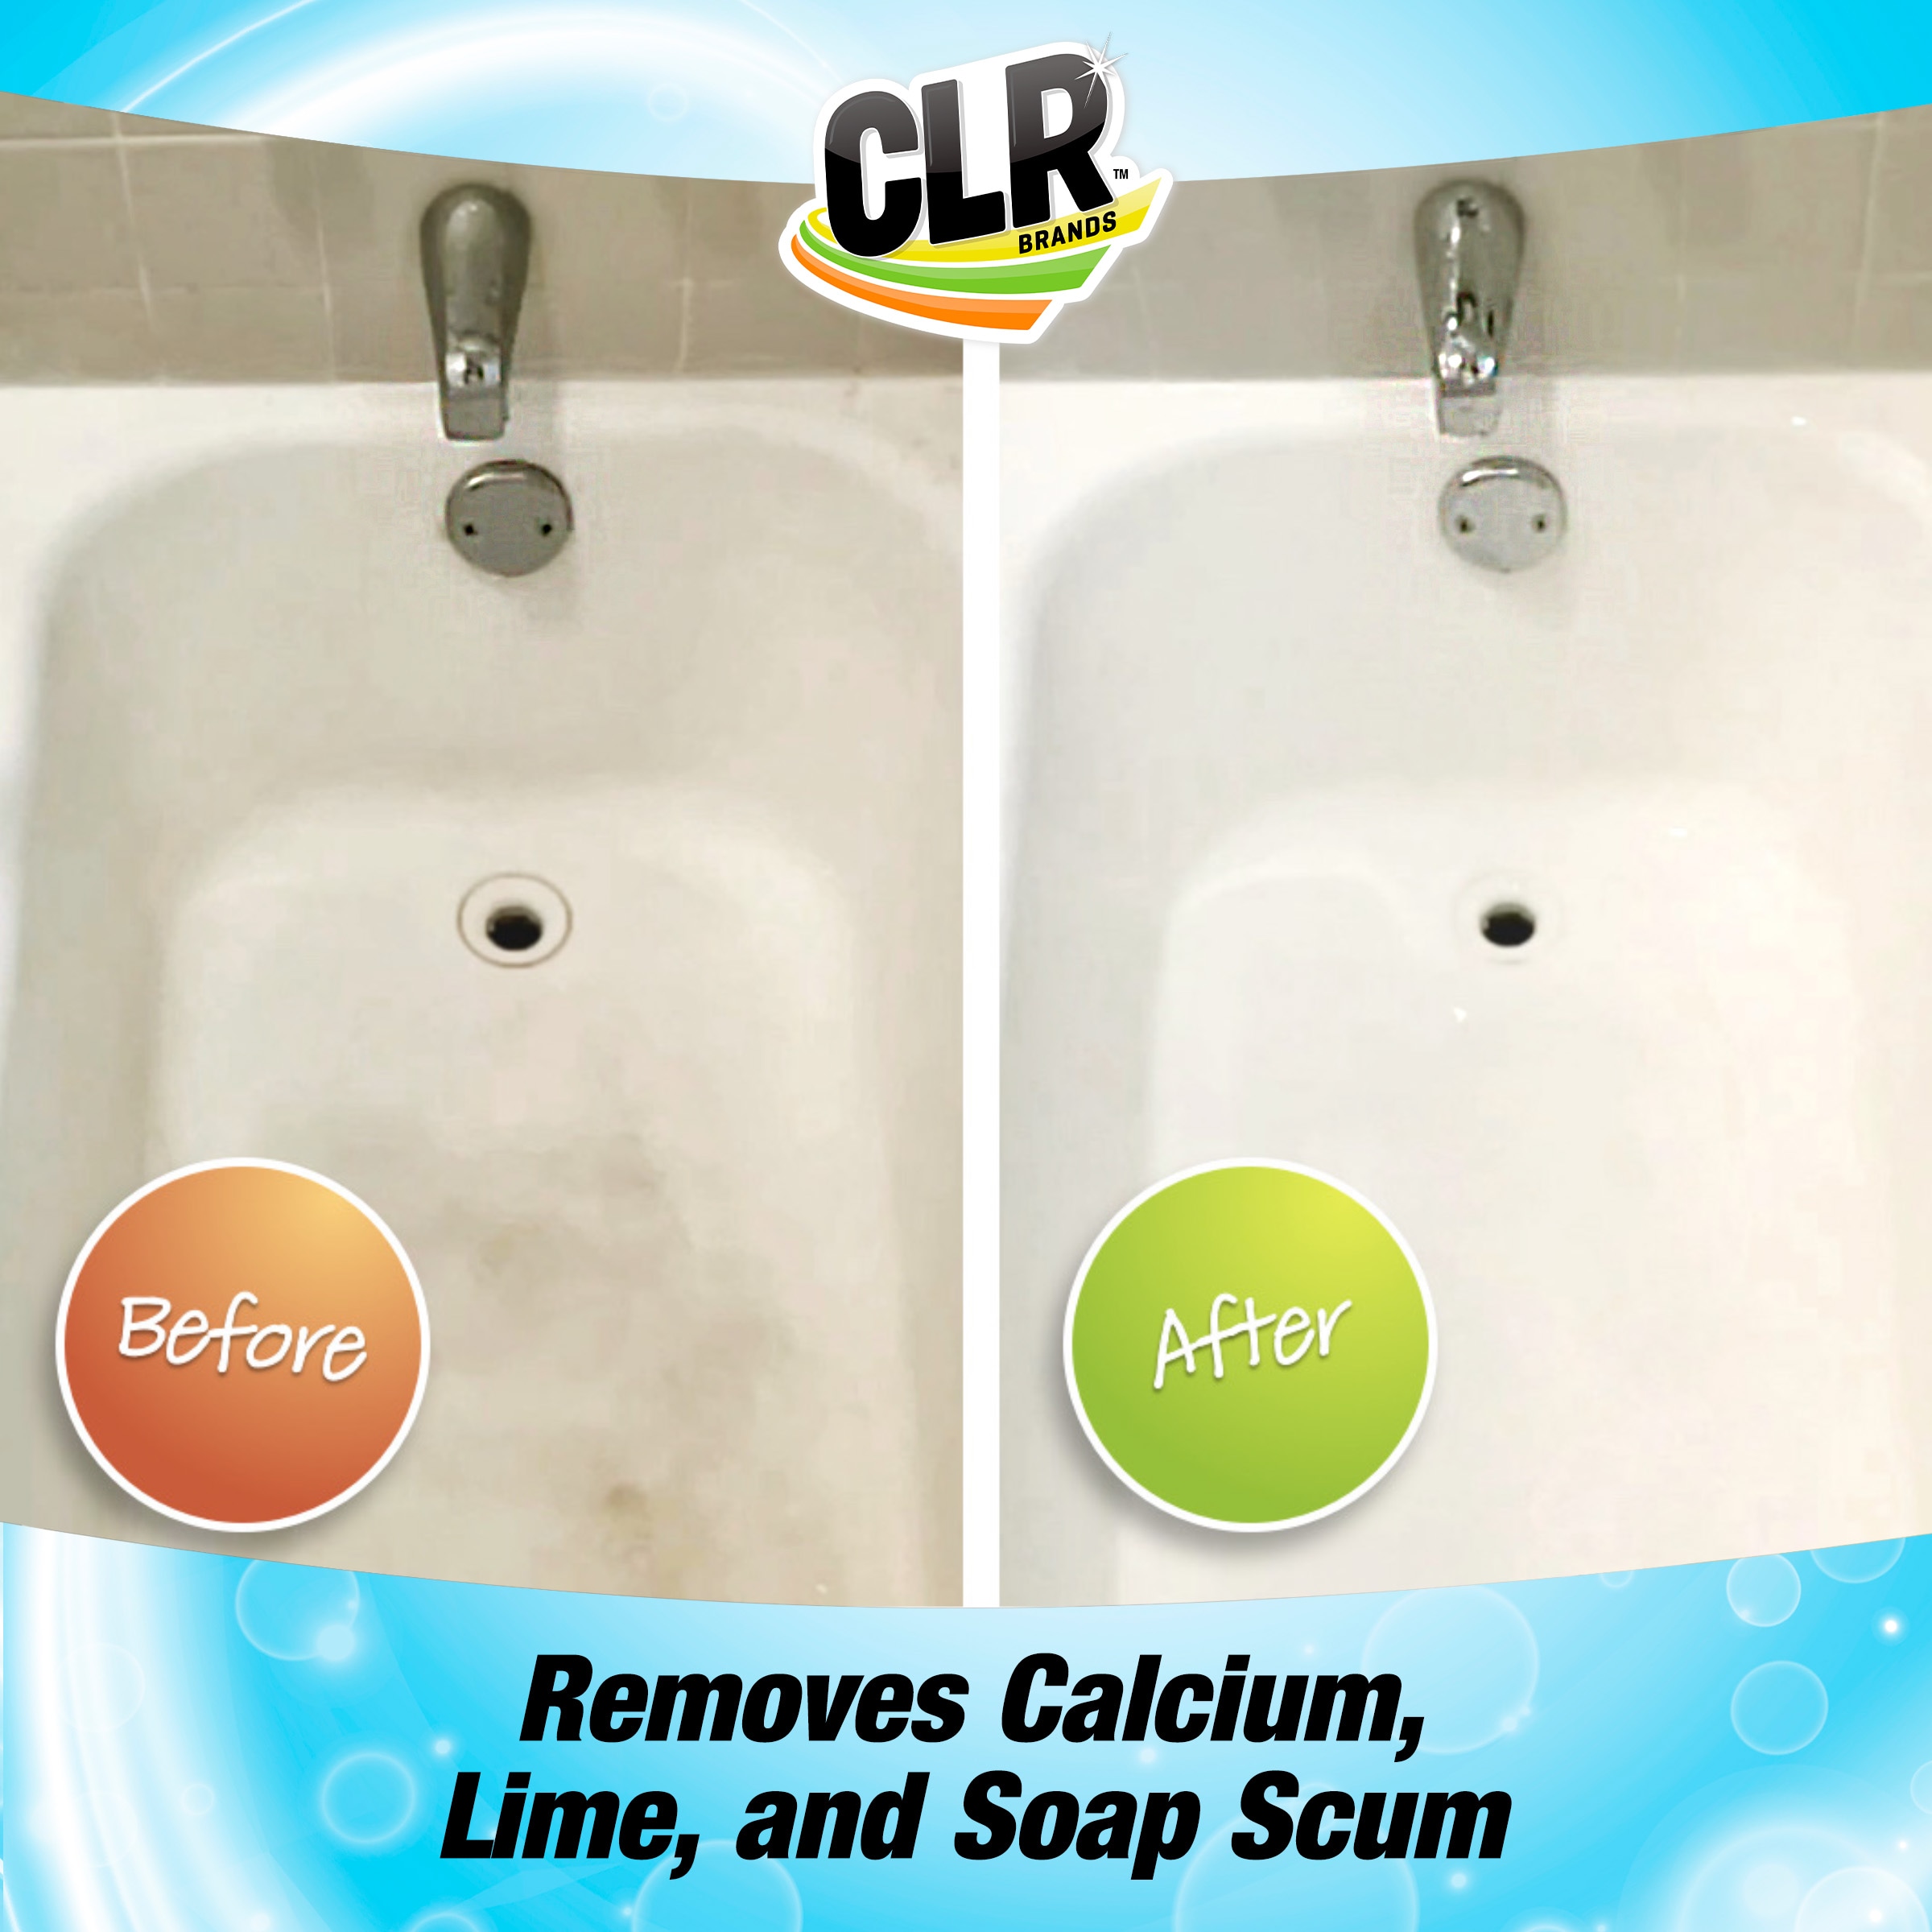 CLR Brilliant Bath  Cleaner to Scrub Toilets, Tubs, Sinks, Countertops &  More